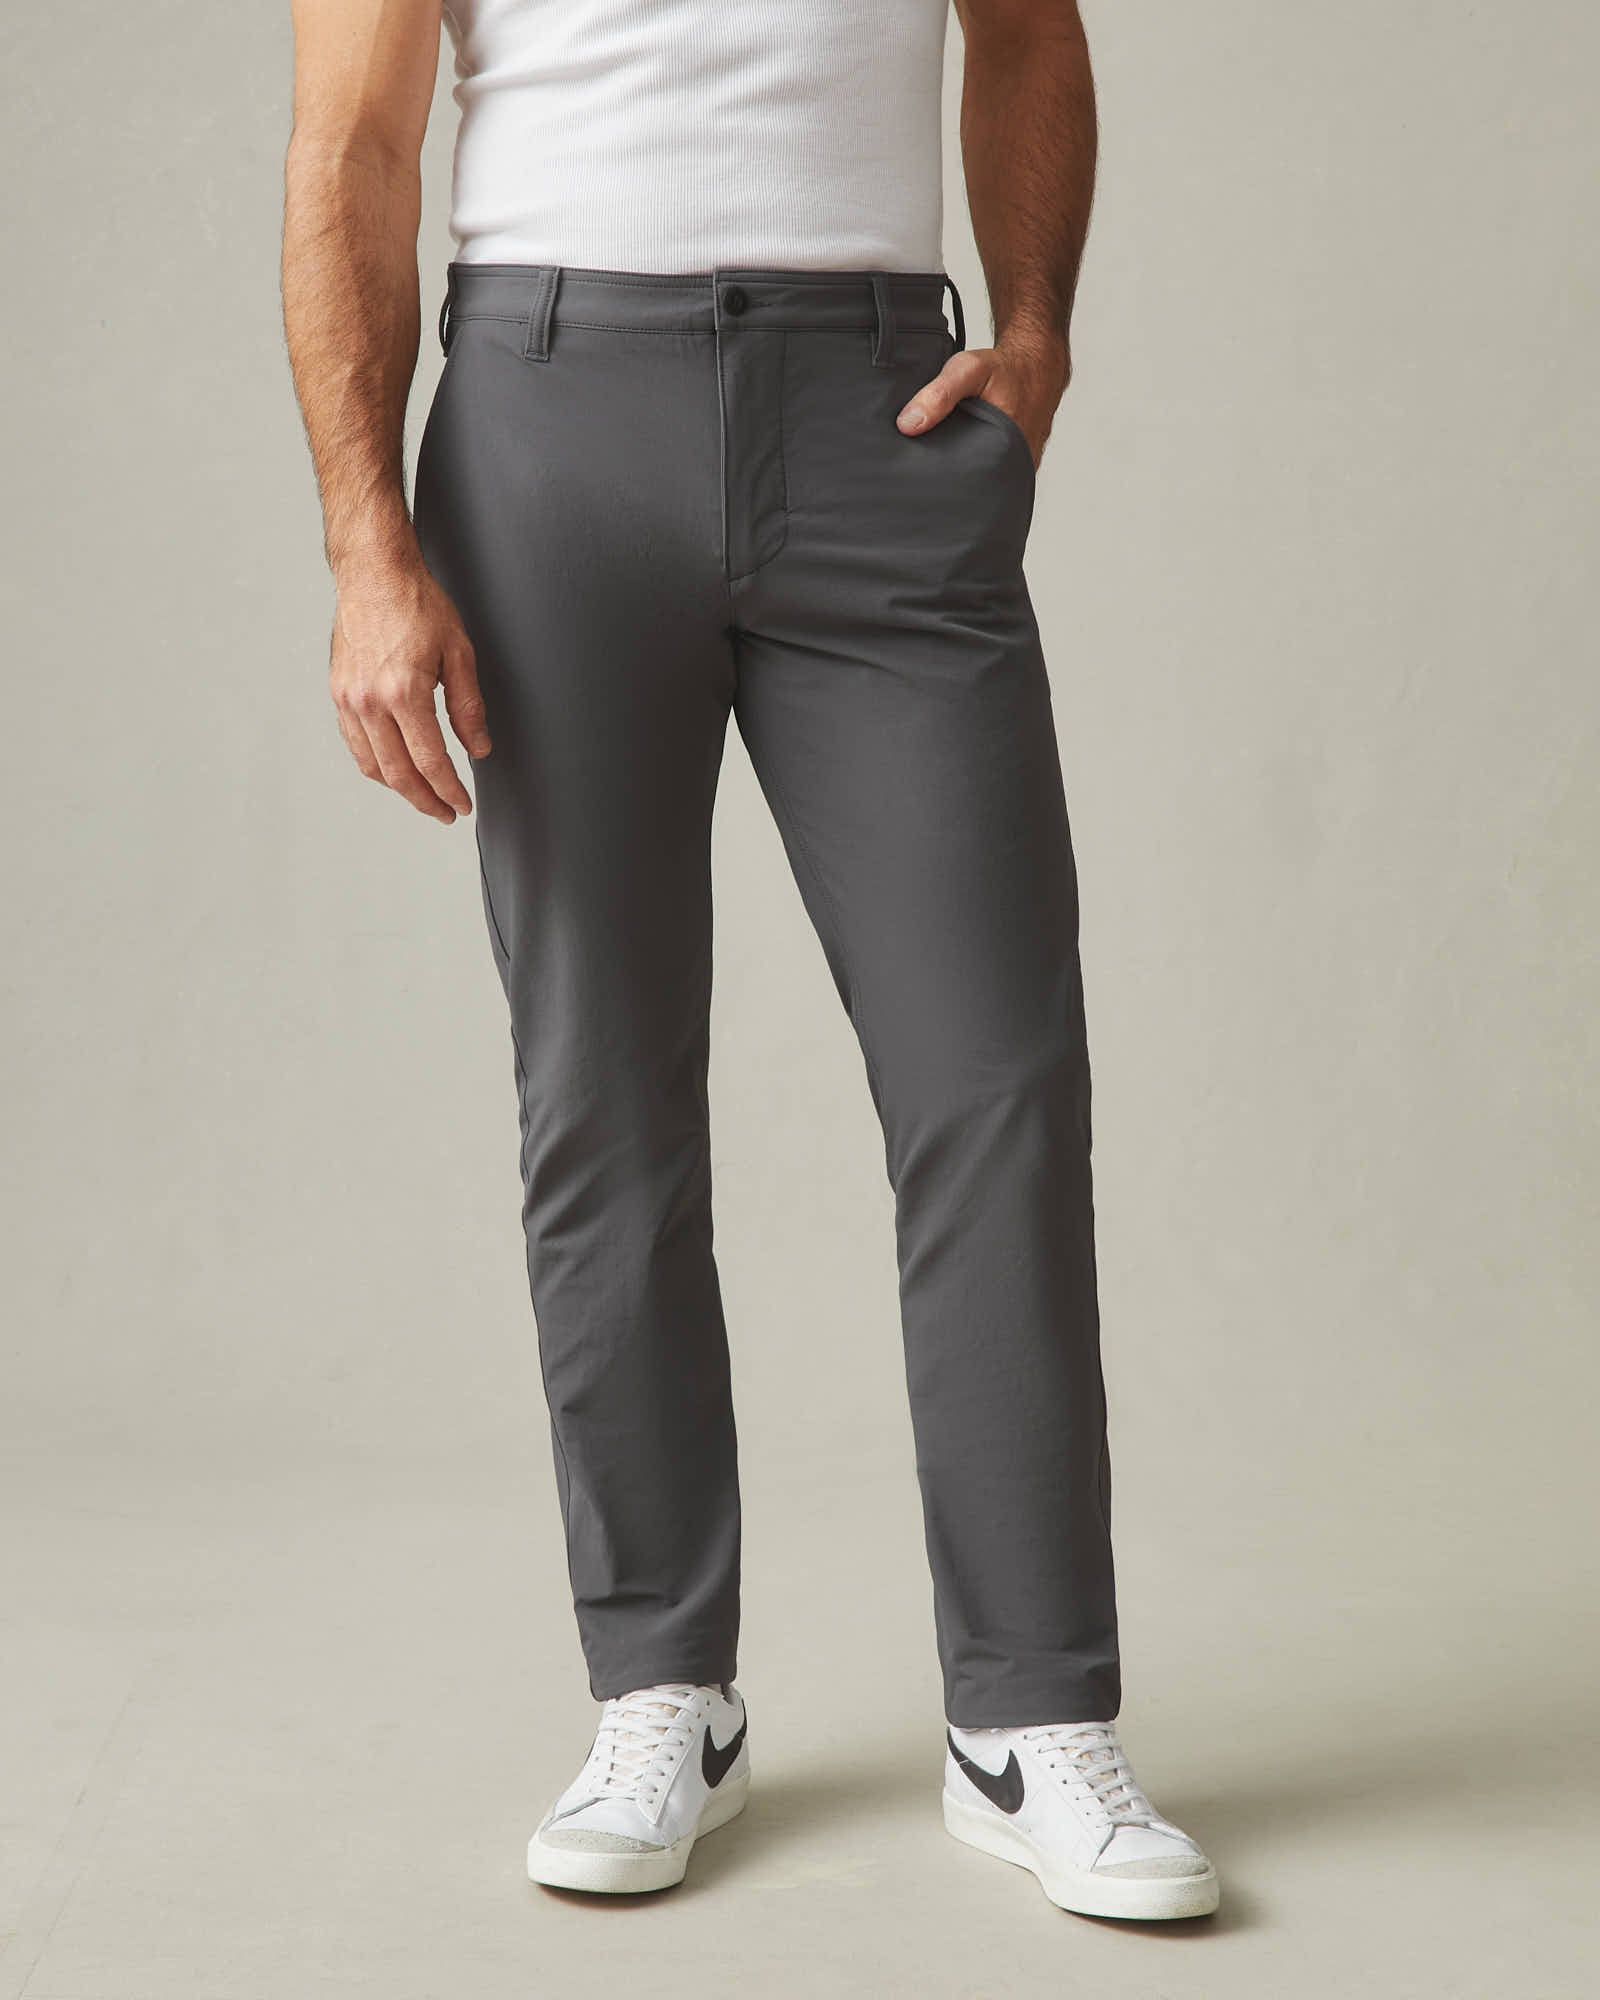 How to Style Grey Pants With Black Shoes